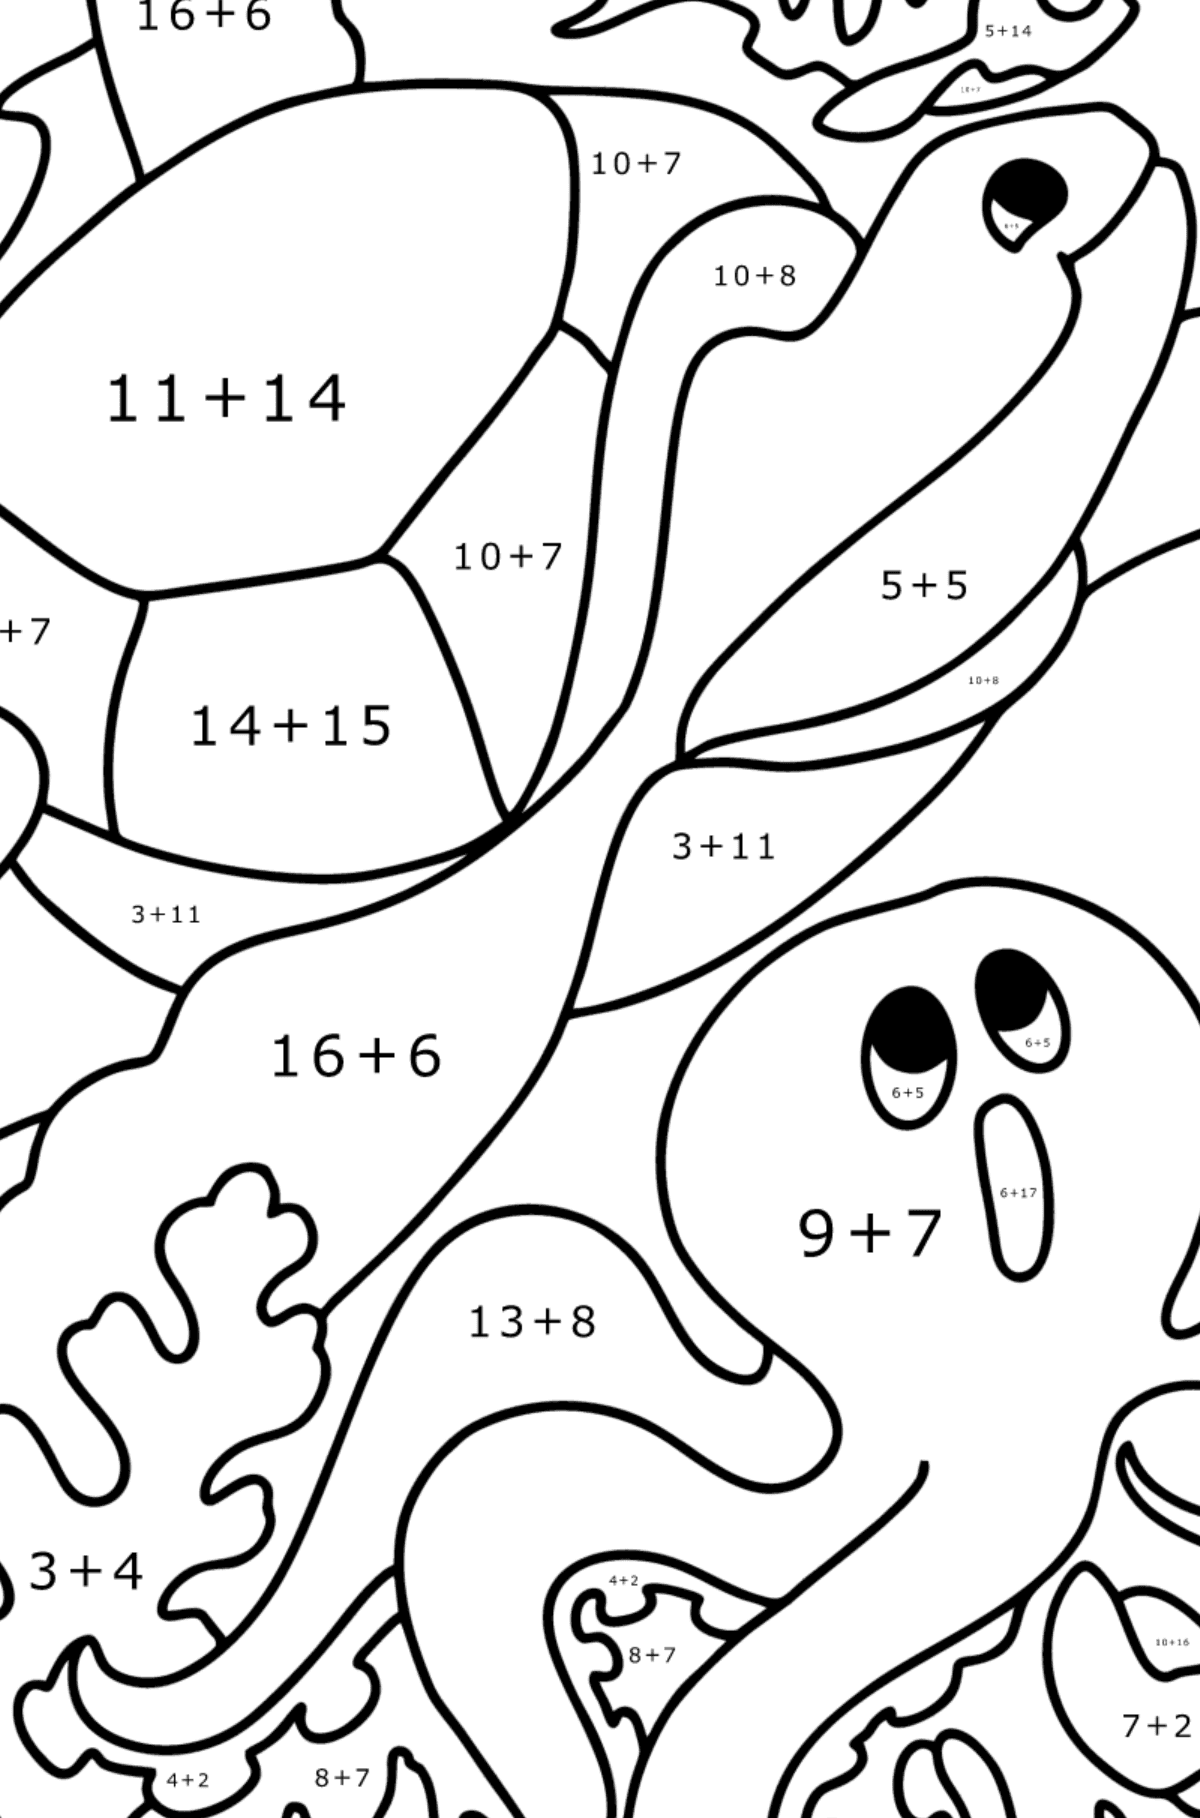 Fish, Turtle, Crab and Octopus coloring page - Math Coloring - Addition for Kids